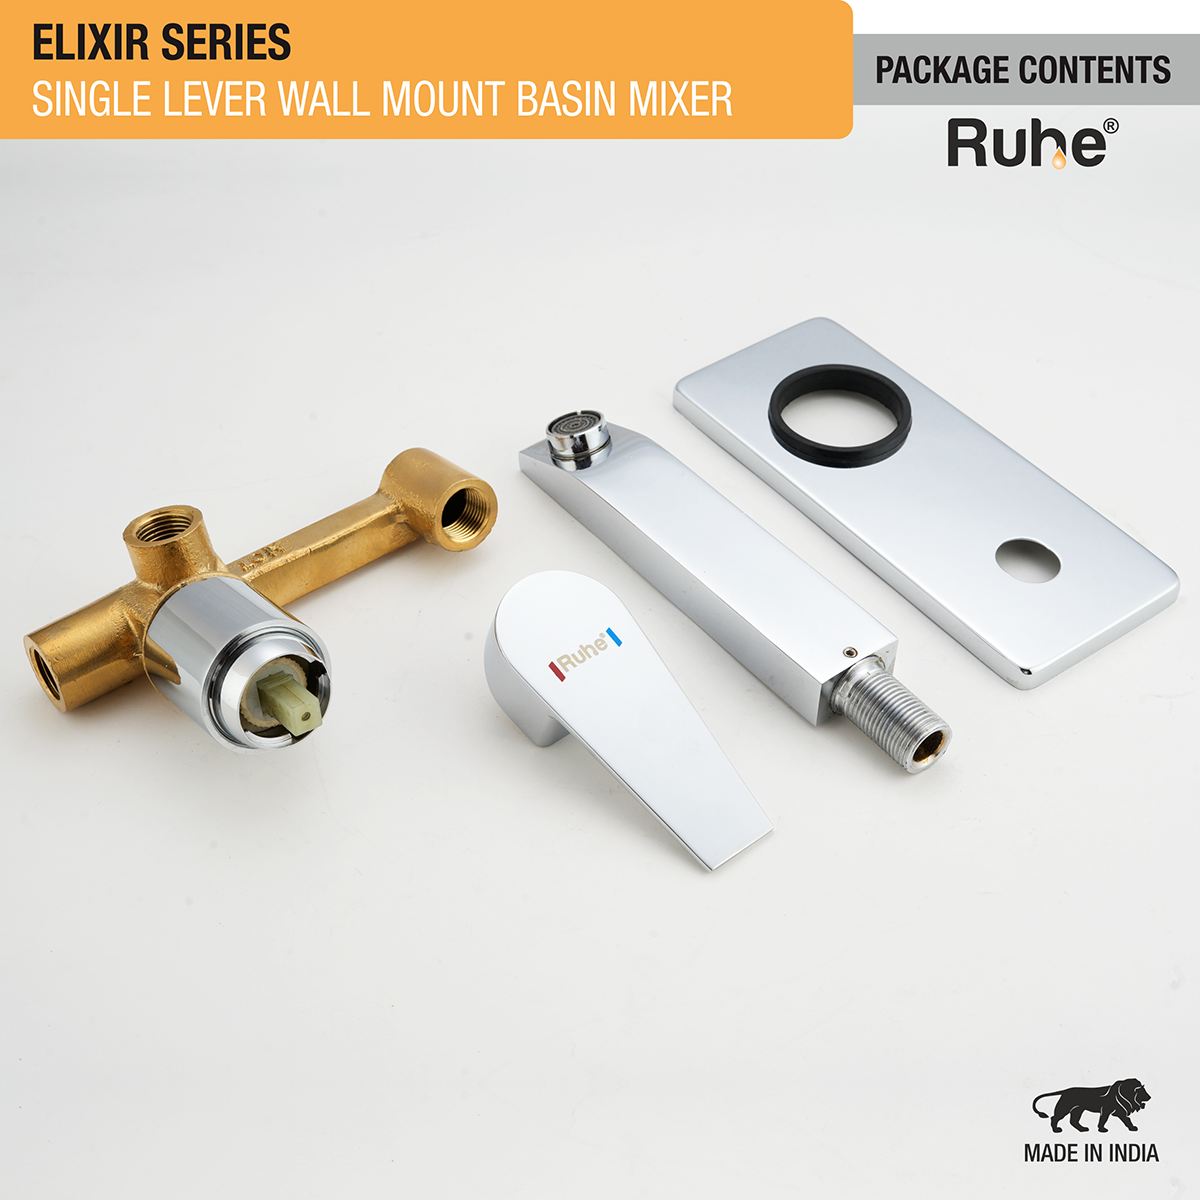 Elixir Single Lever Wall Mixer Faucet Package Contents